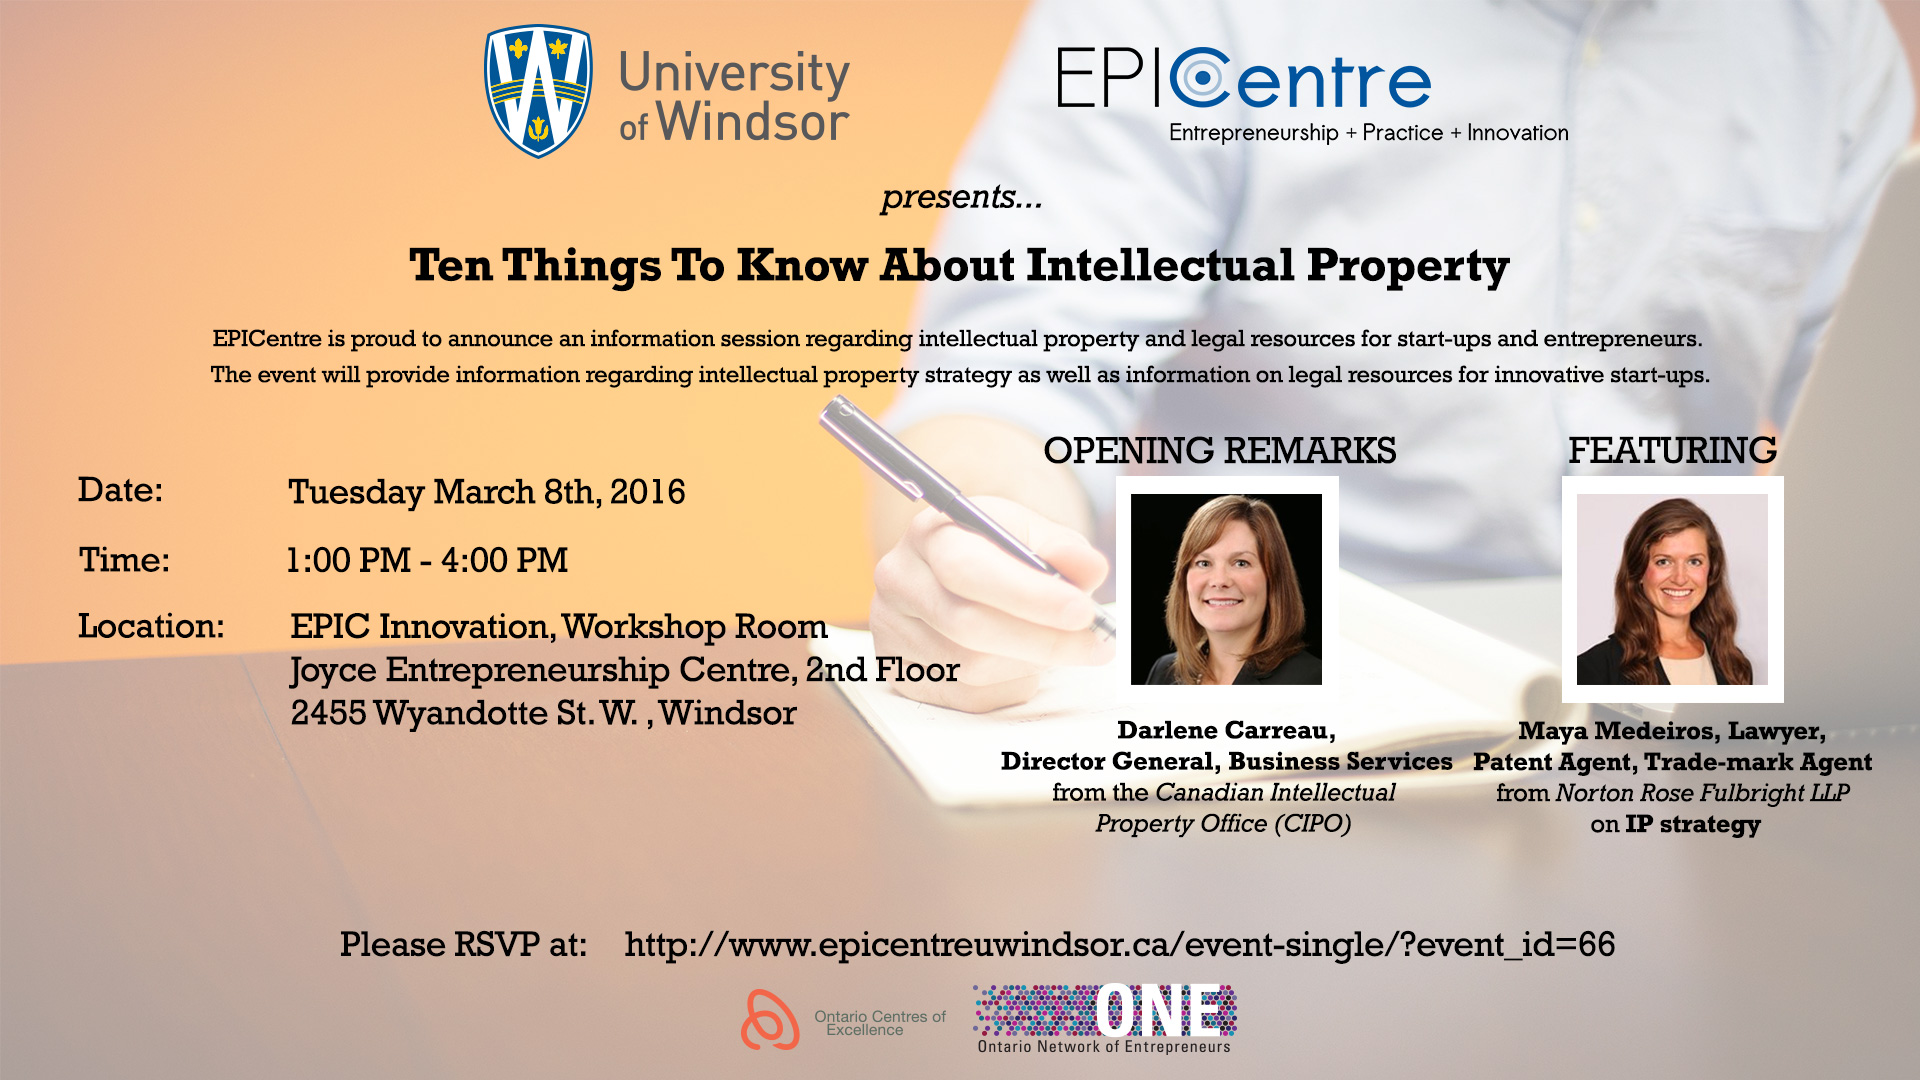 Ten Things to Know About Intellectual Property